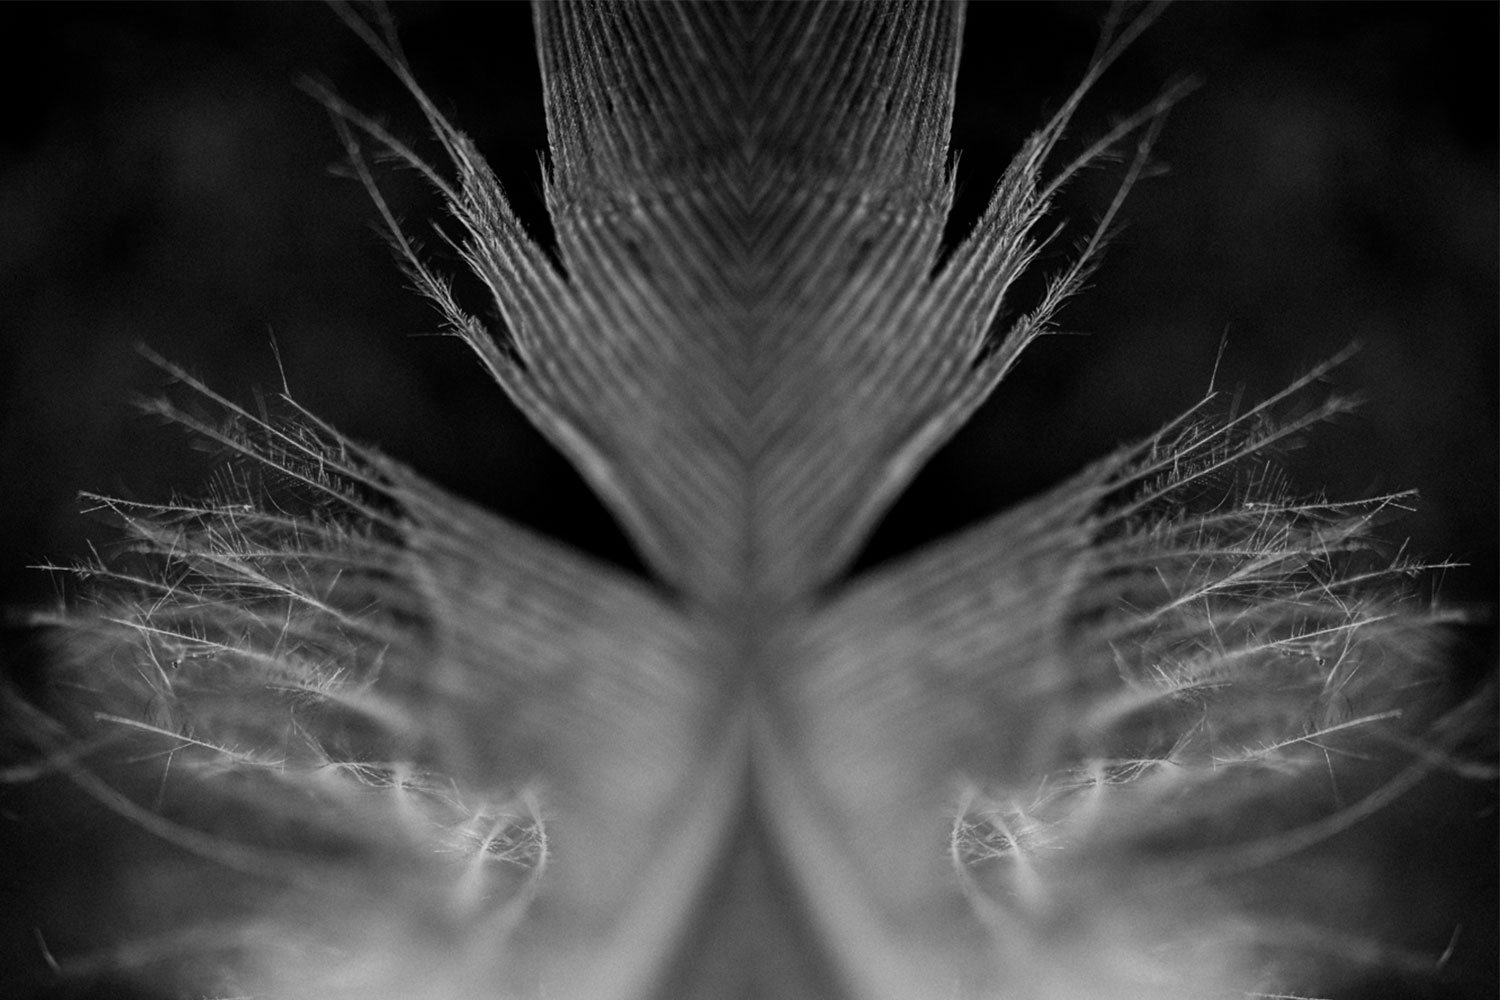 Feather mirrored to find a pleasing shape.